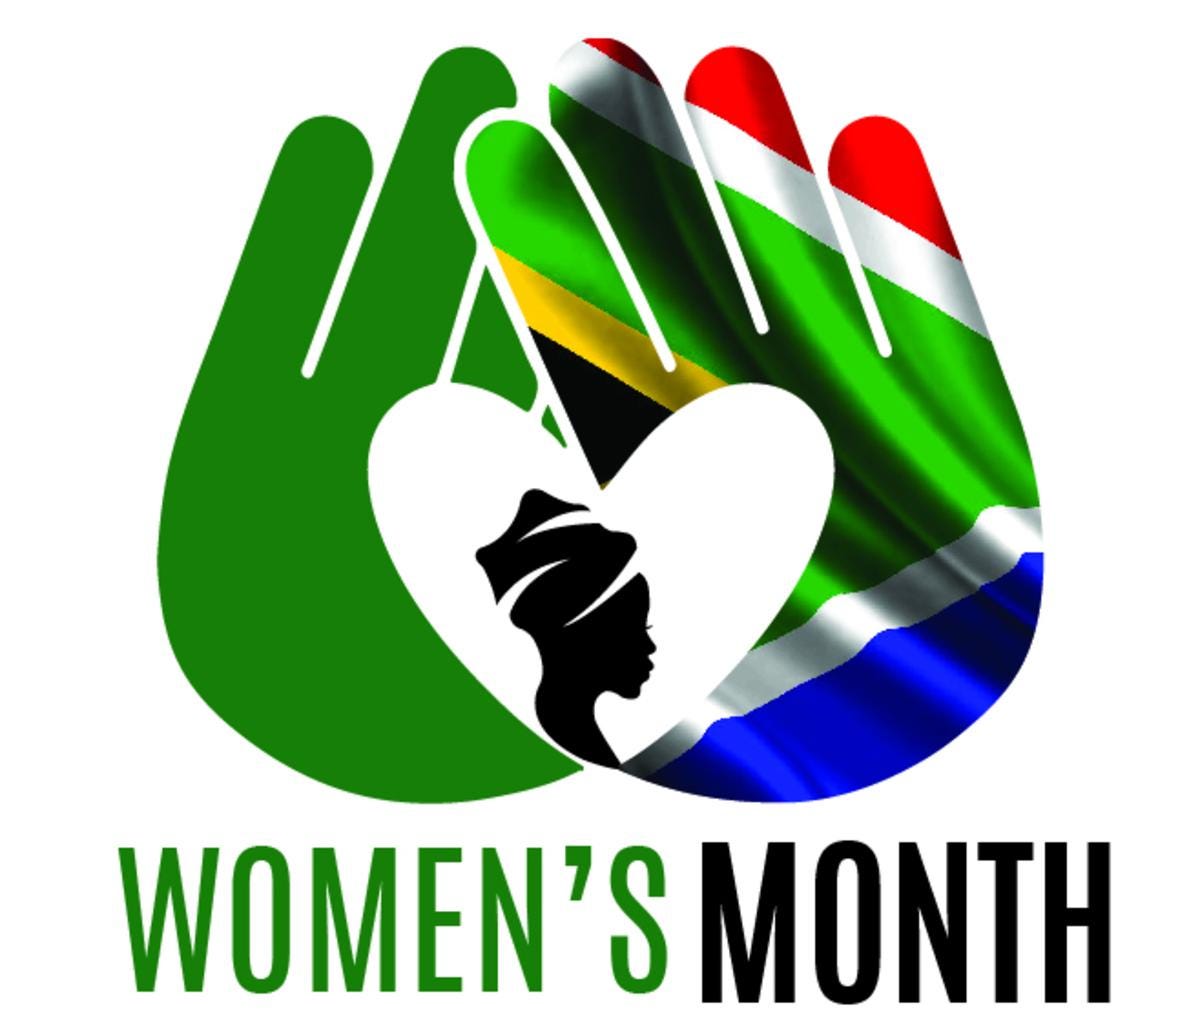 Women's Month: Youth And People With Disabilities | Careers Portal